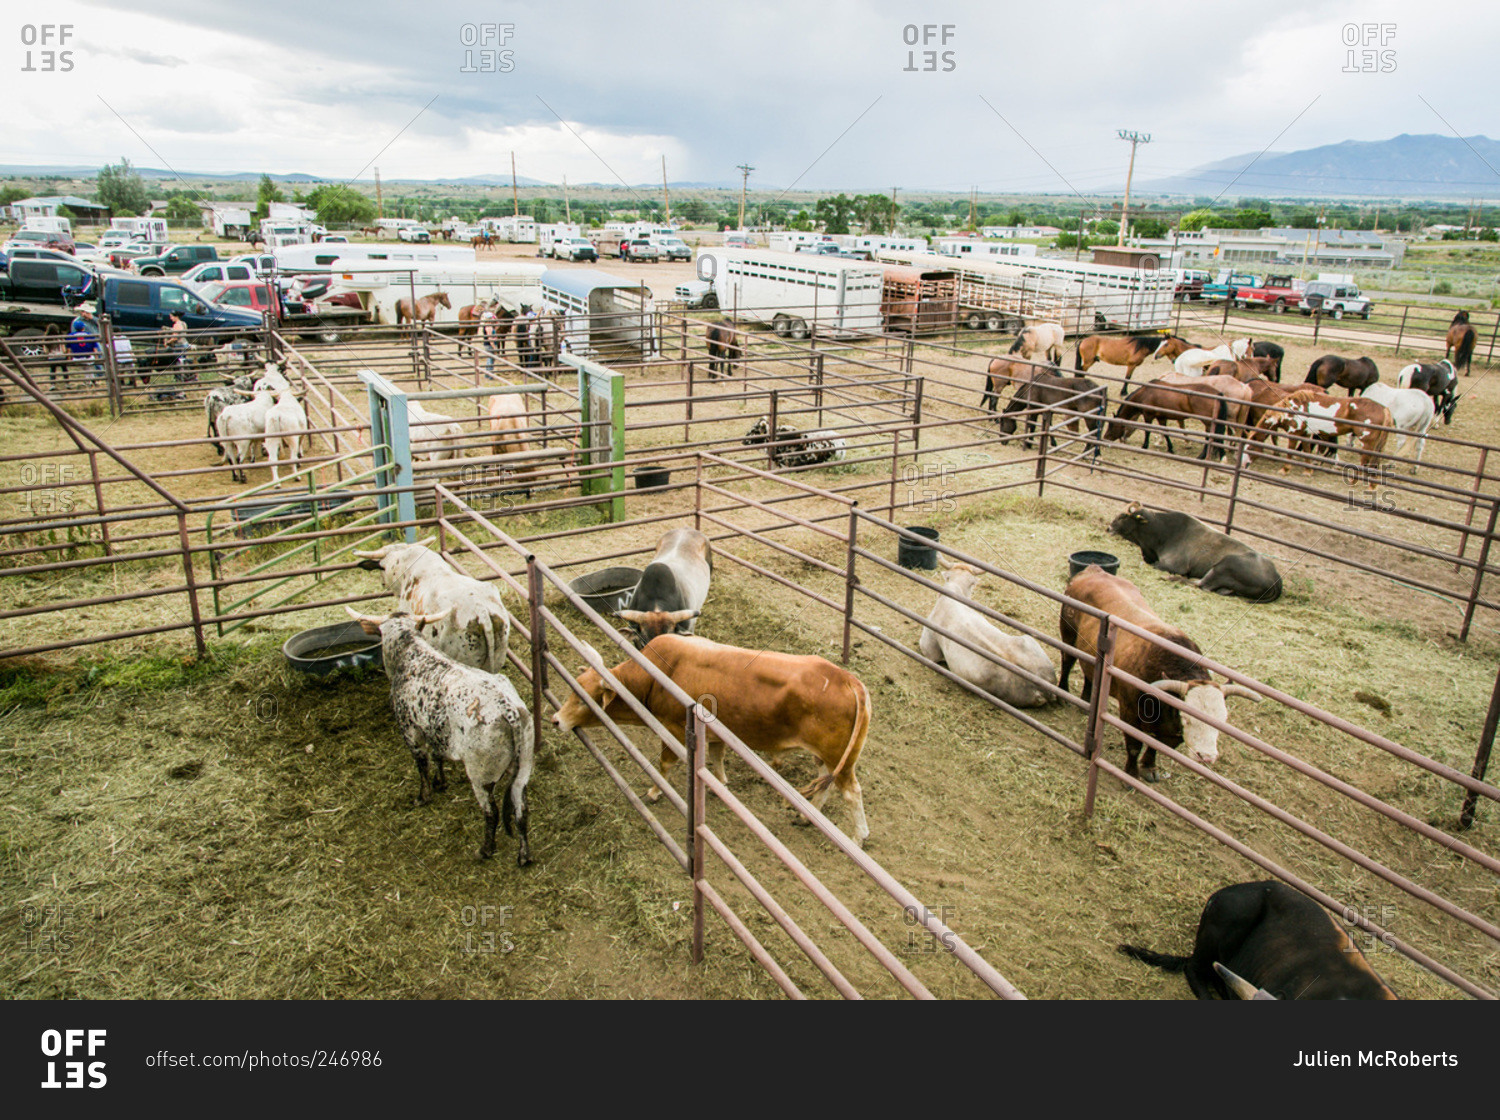 Cattle and horses in pens at a rodeo